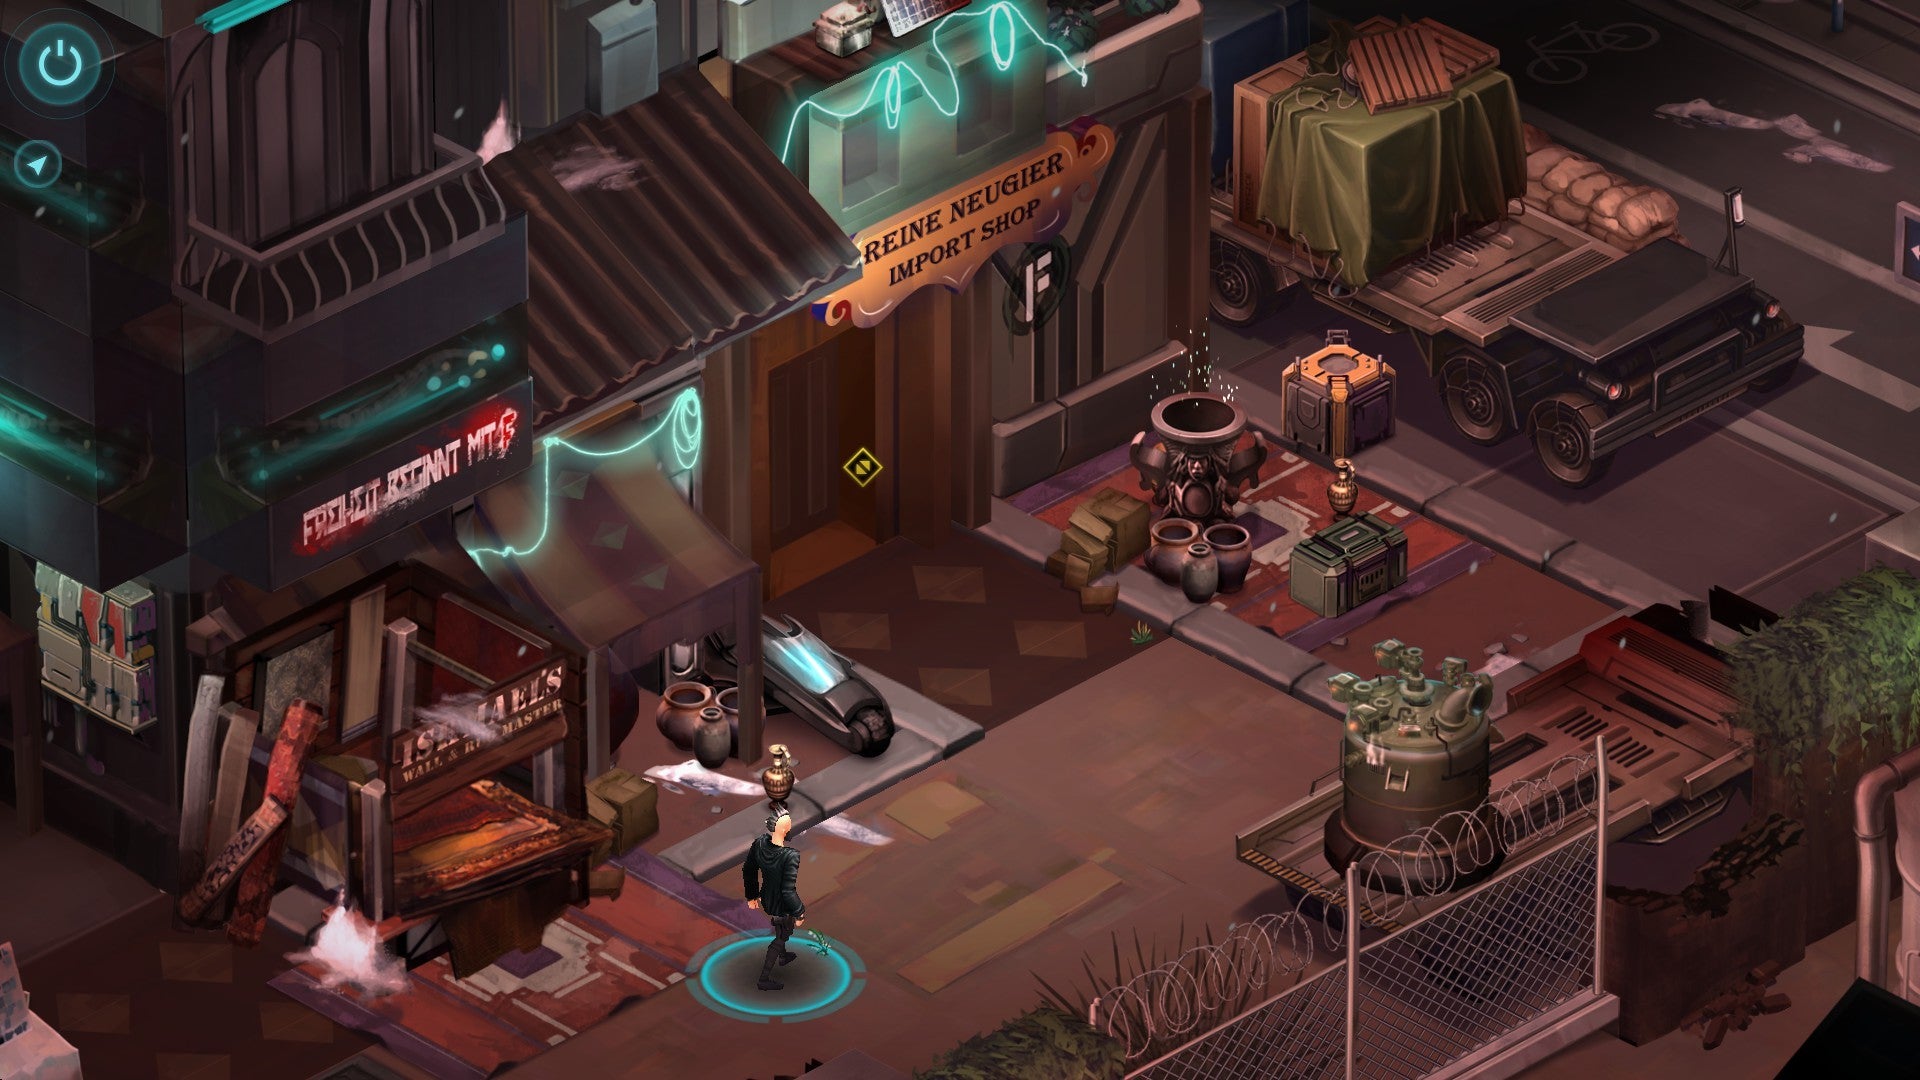 Shadowrun (SNES) is just Blade Runner with dragons (every snes rpg #14) 